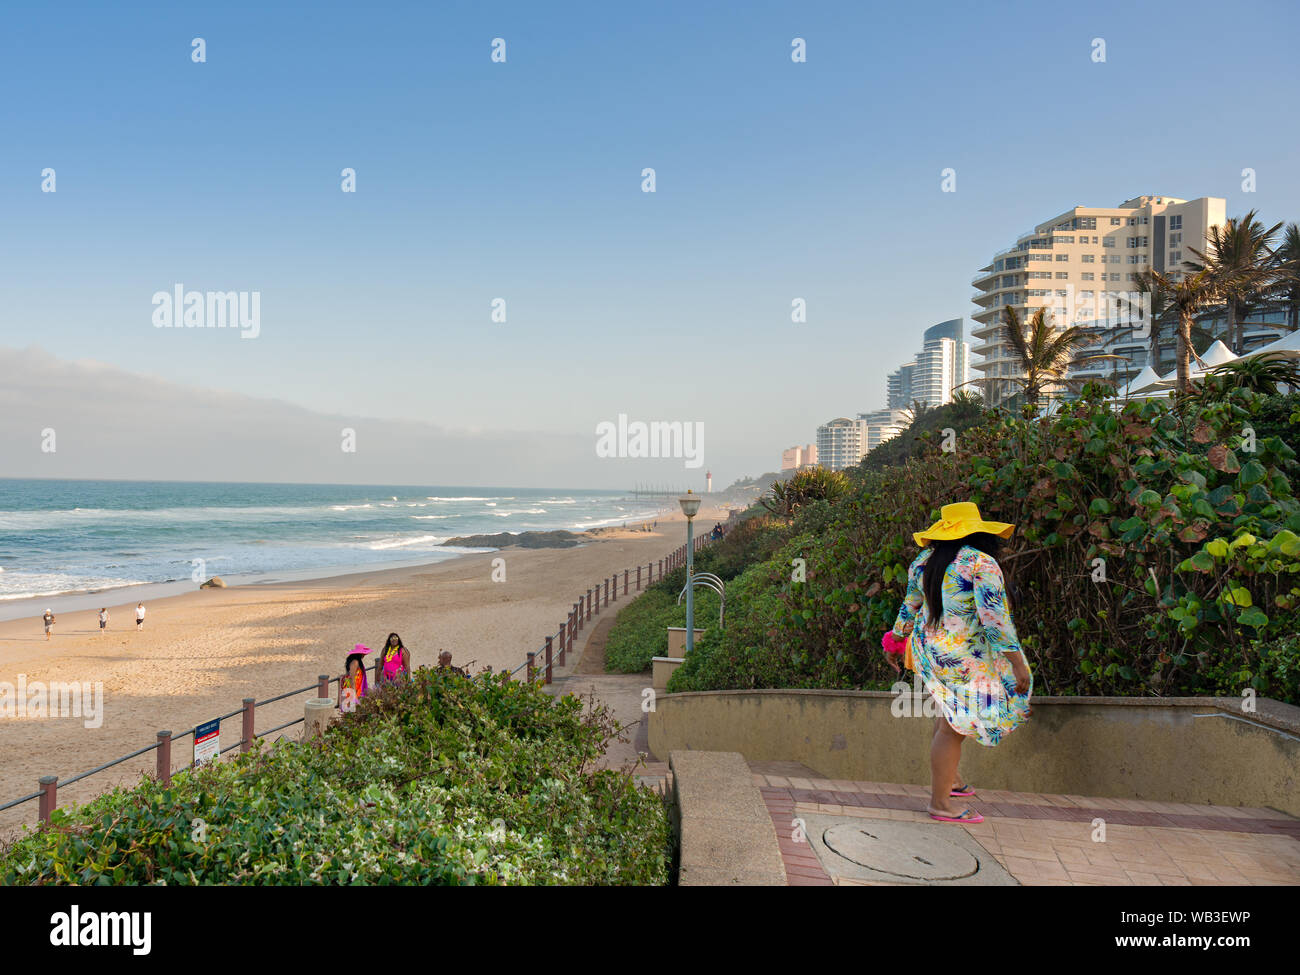 DURBAN SOUTH AFRICA - AUGUST 23 2019: Woman in colorful clothing on the promenade at the beach in Umhlanga Rocks near Durban KwaZulu-Natal South Afric Stock Photo